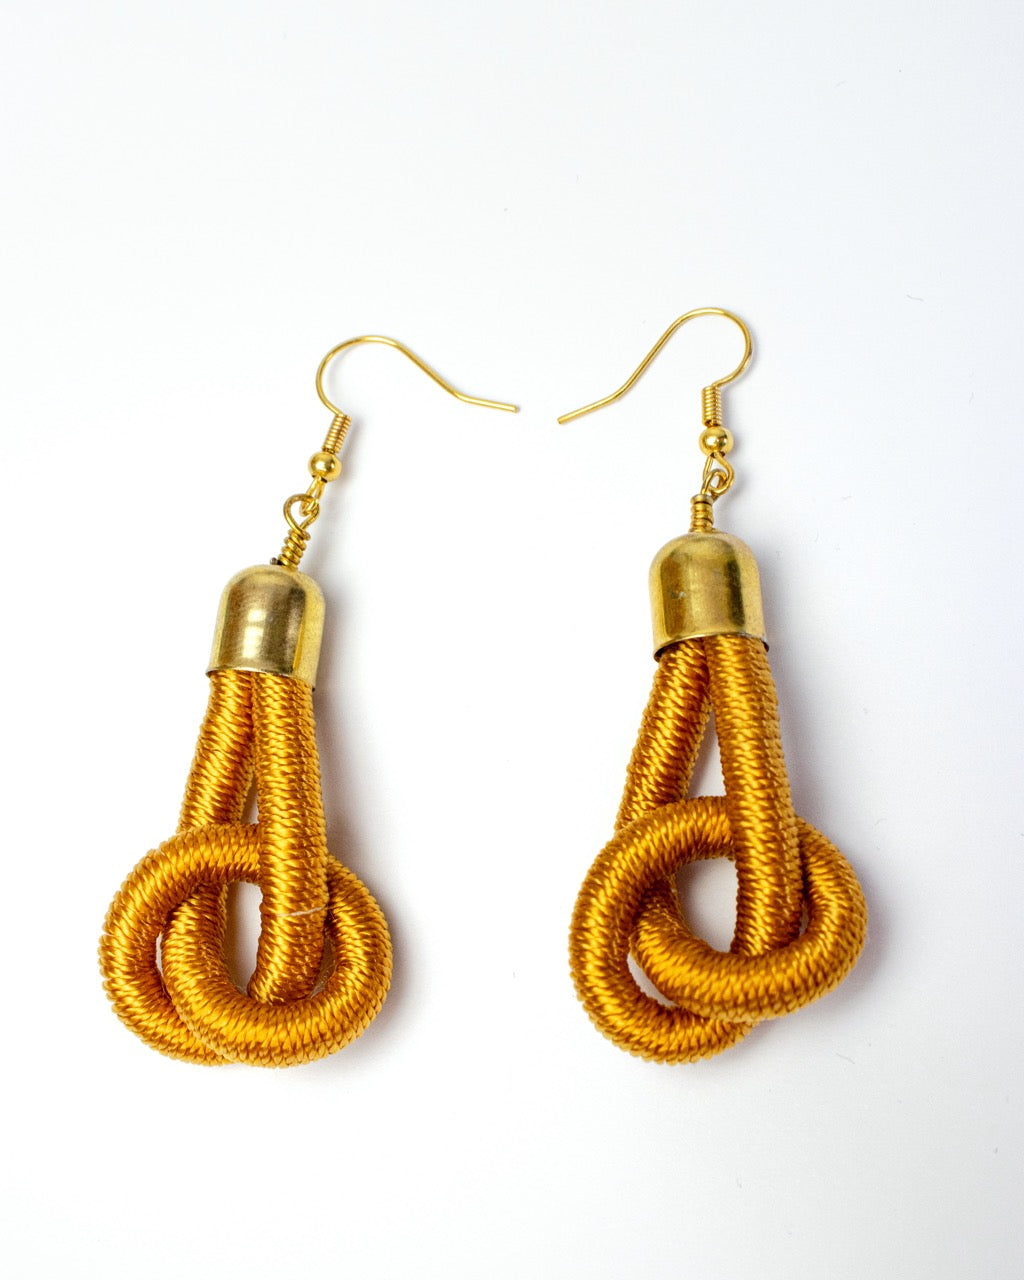 Knot Earrings - Wholesale Pack of 3